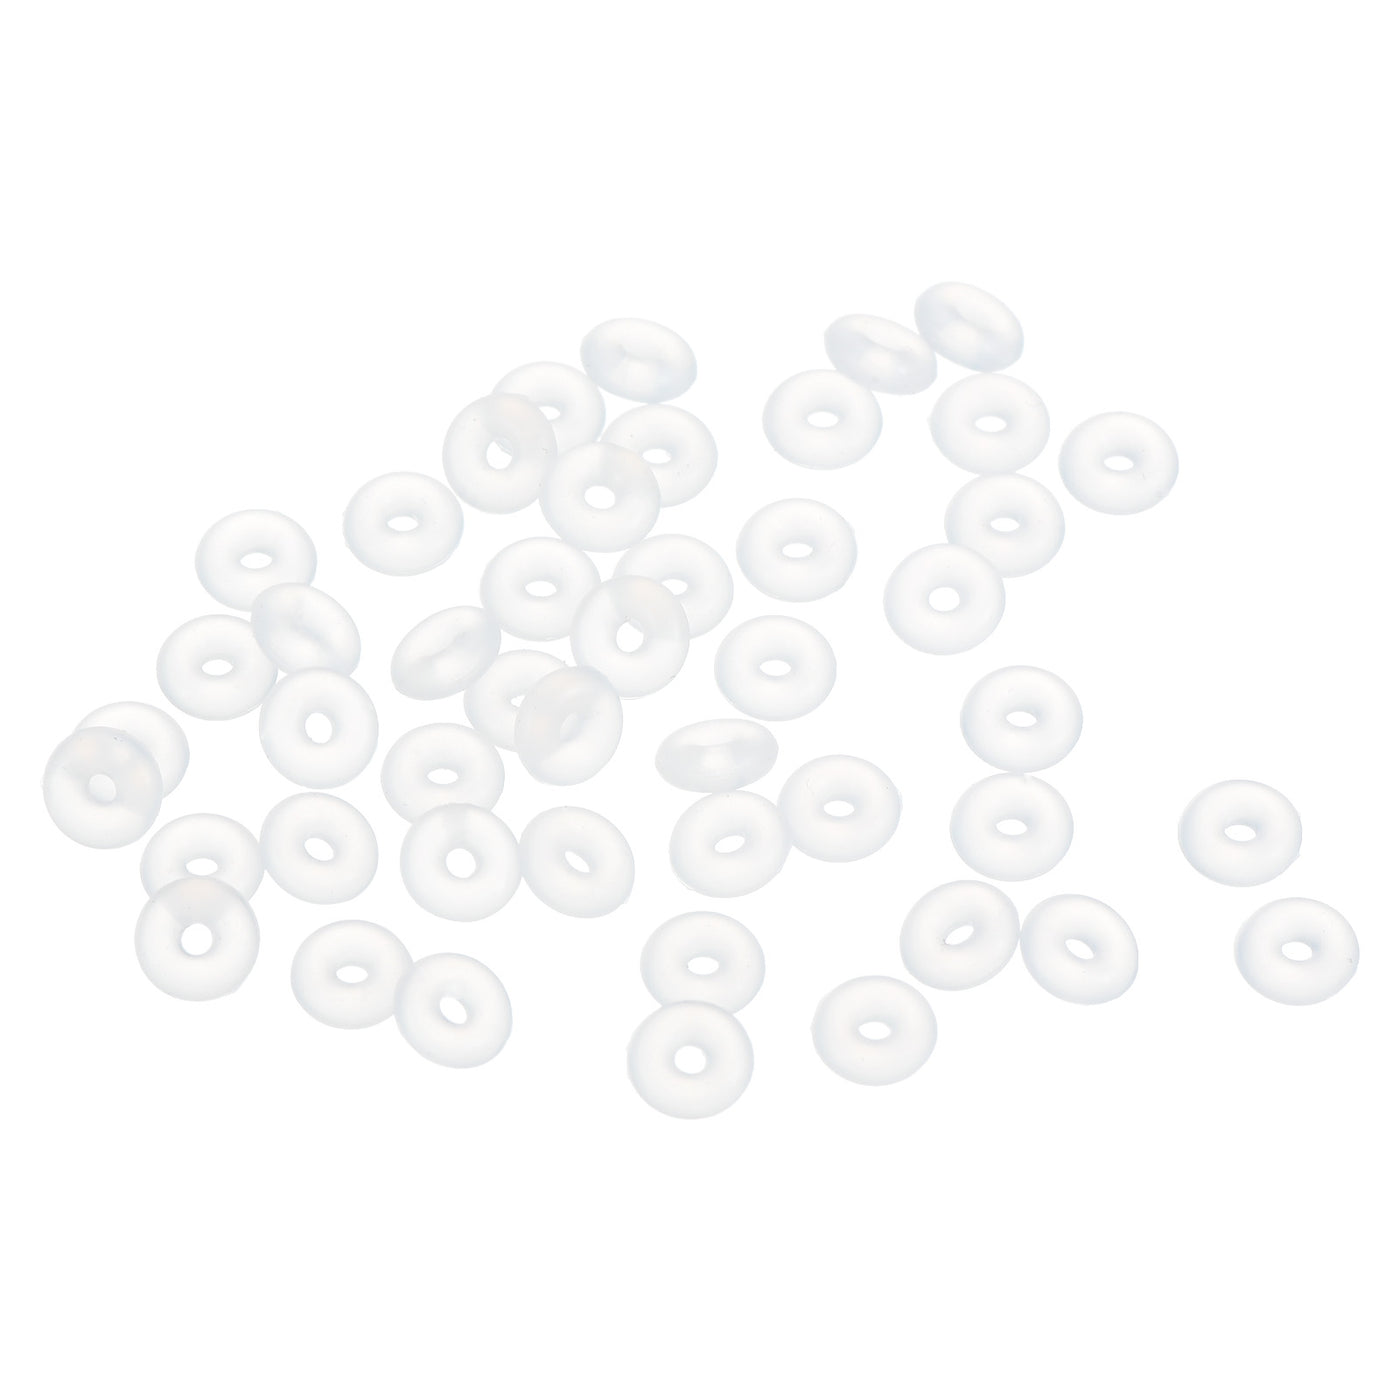 uxcell Uxcell 50Pcs Silicone O-Rings 5mm OD, 1mm ID, 2mm Width, Seal Gasket White